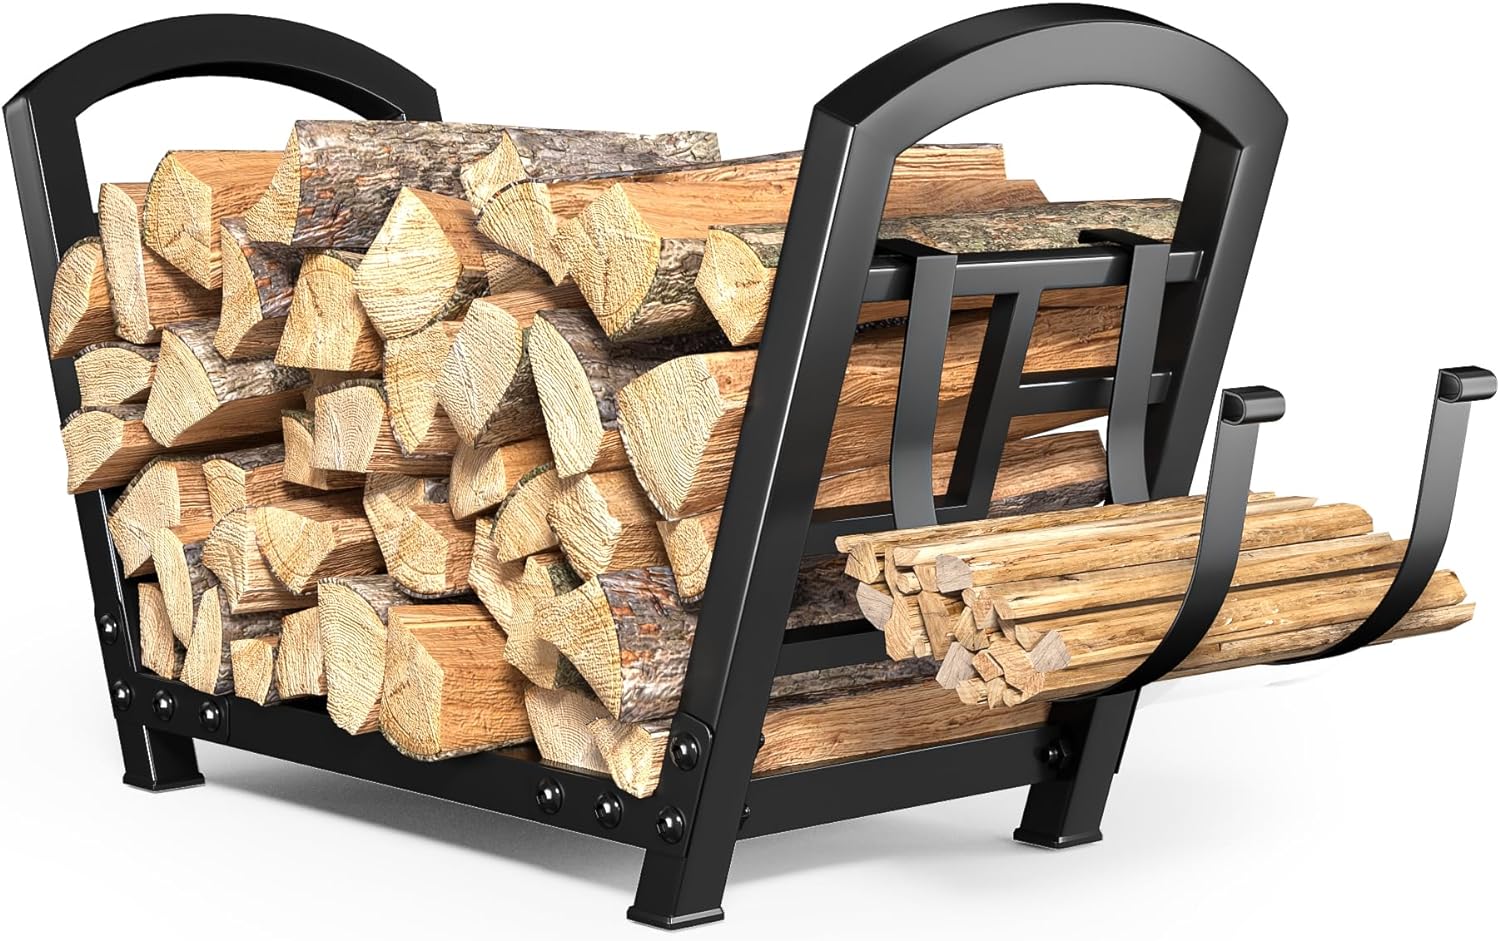 Small Firewood Rack Indoor Log Holder Wood Storage For Fireplace, Heavy Duty Metal Firewood Holder with Removable Holders, Up-Loaded to 120lbDecor Outdoor Log Holder